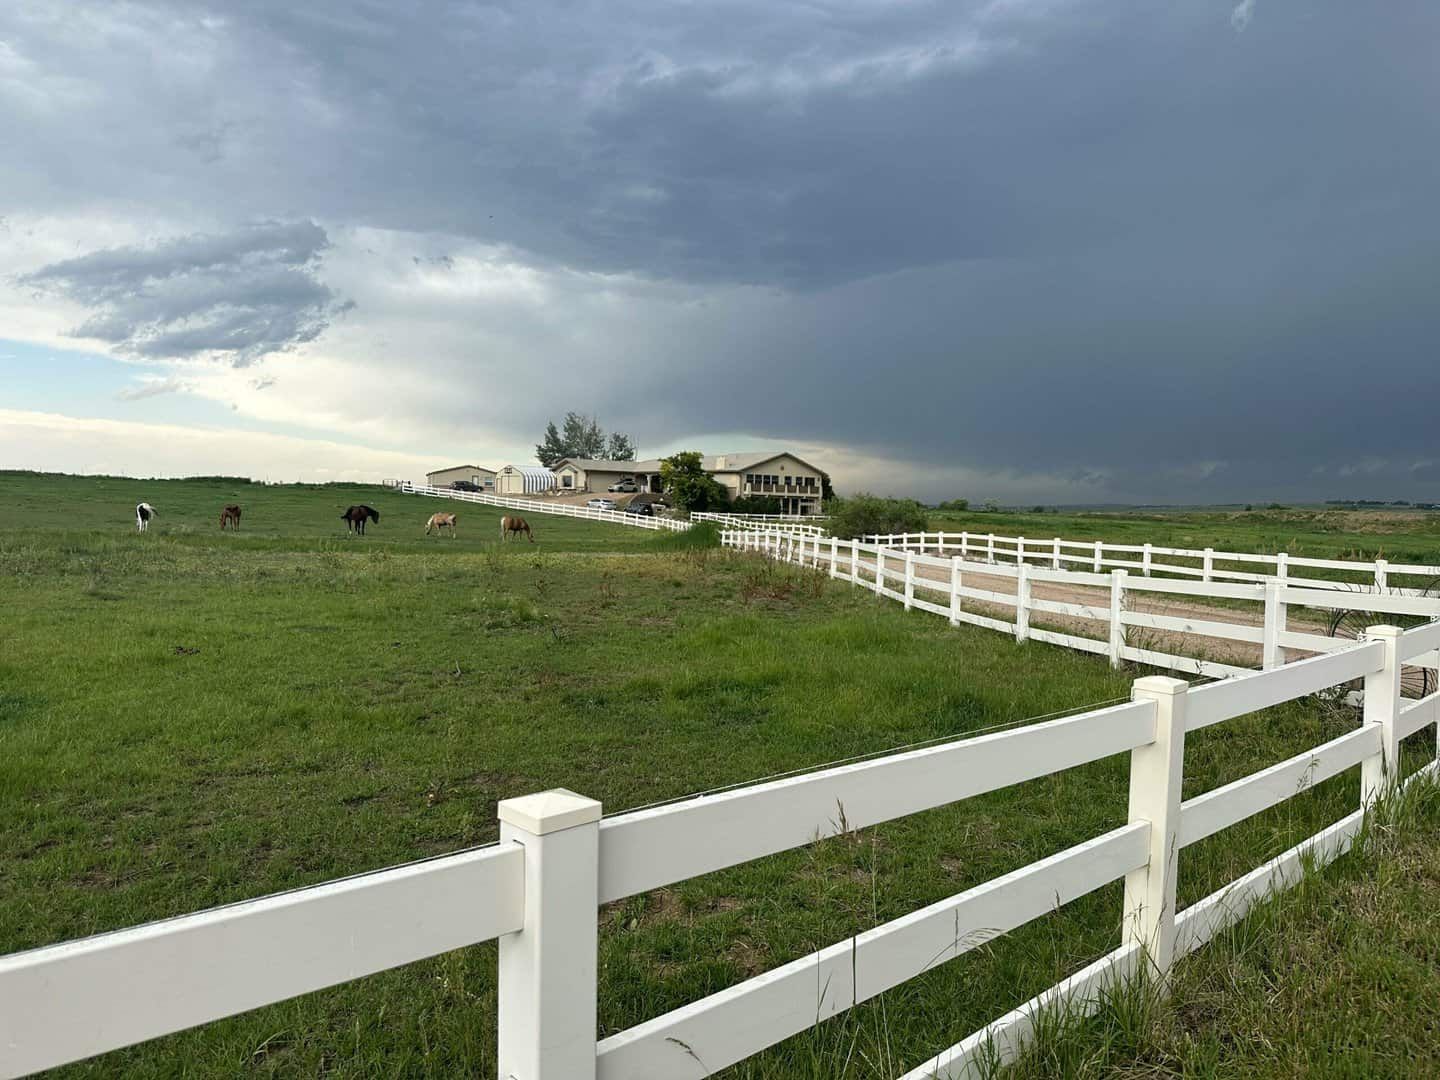 horses inside the pasture surrounded by a white fence; ranch house in the background